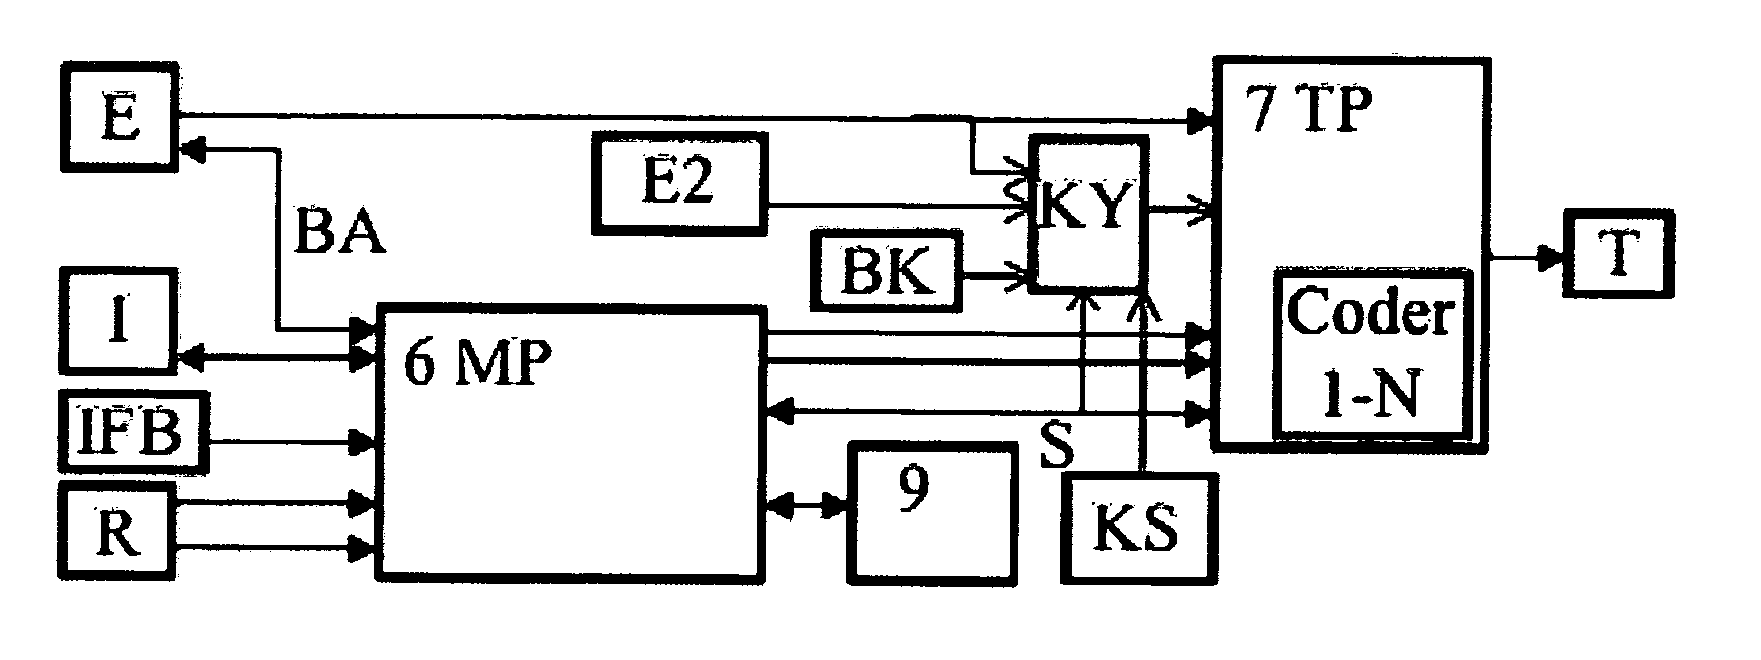 System for transmitting emergency broadcast messages with selectivity to radio, television, computers and smart phones